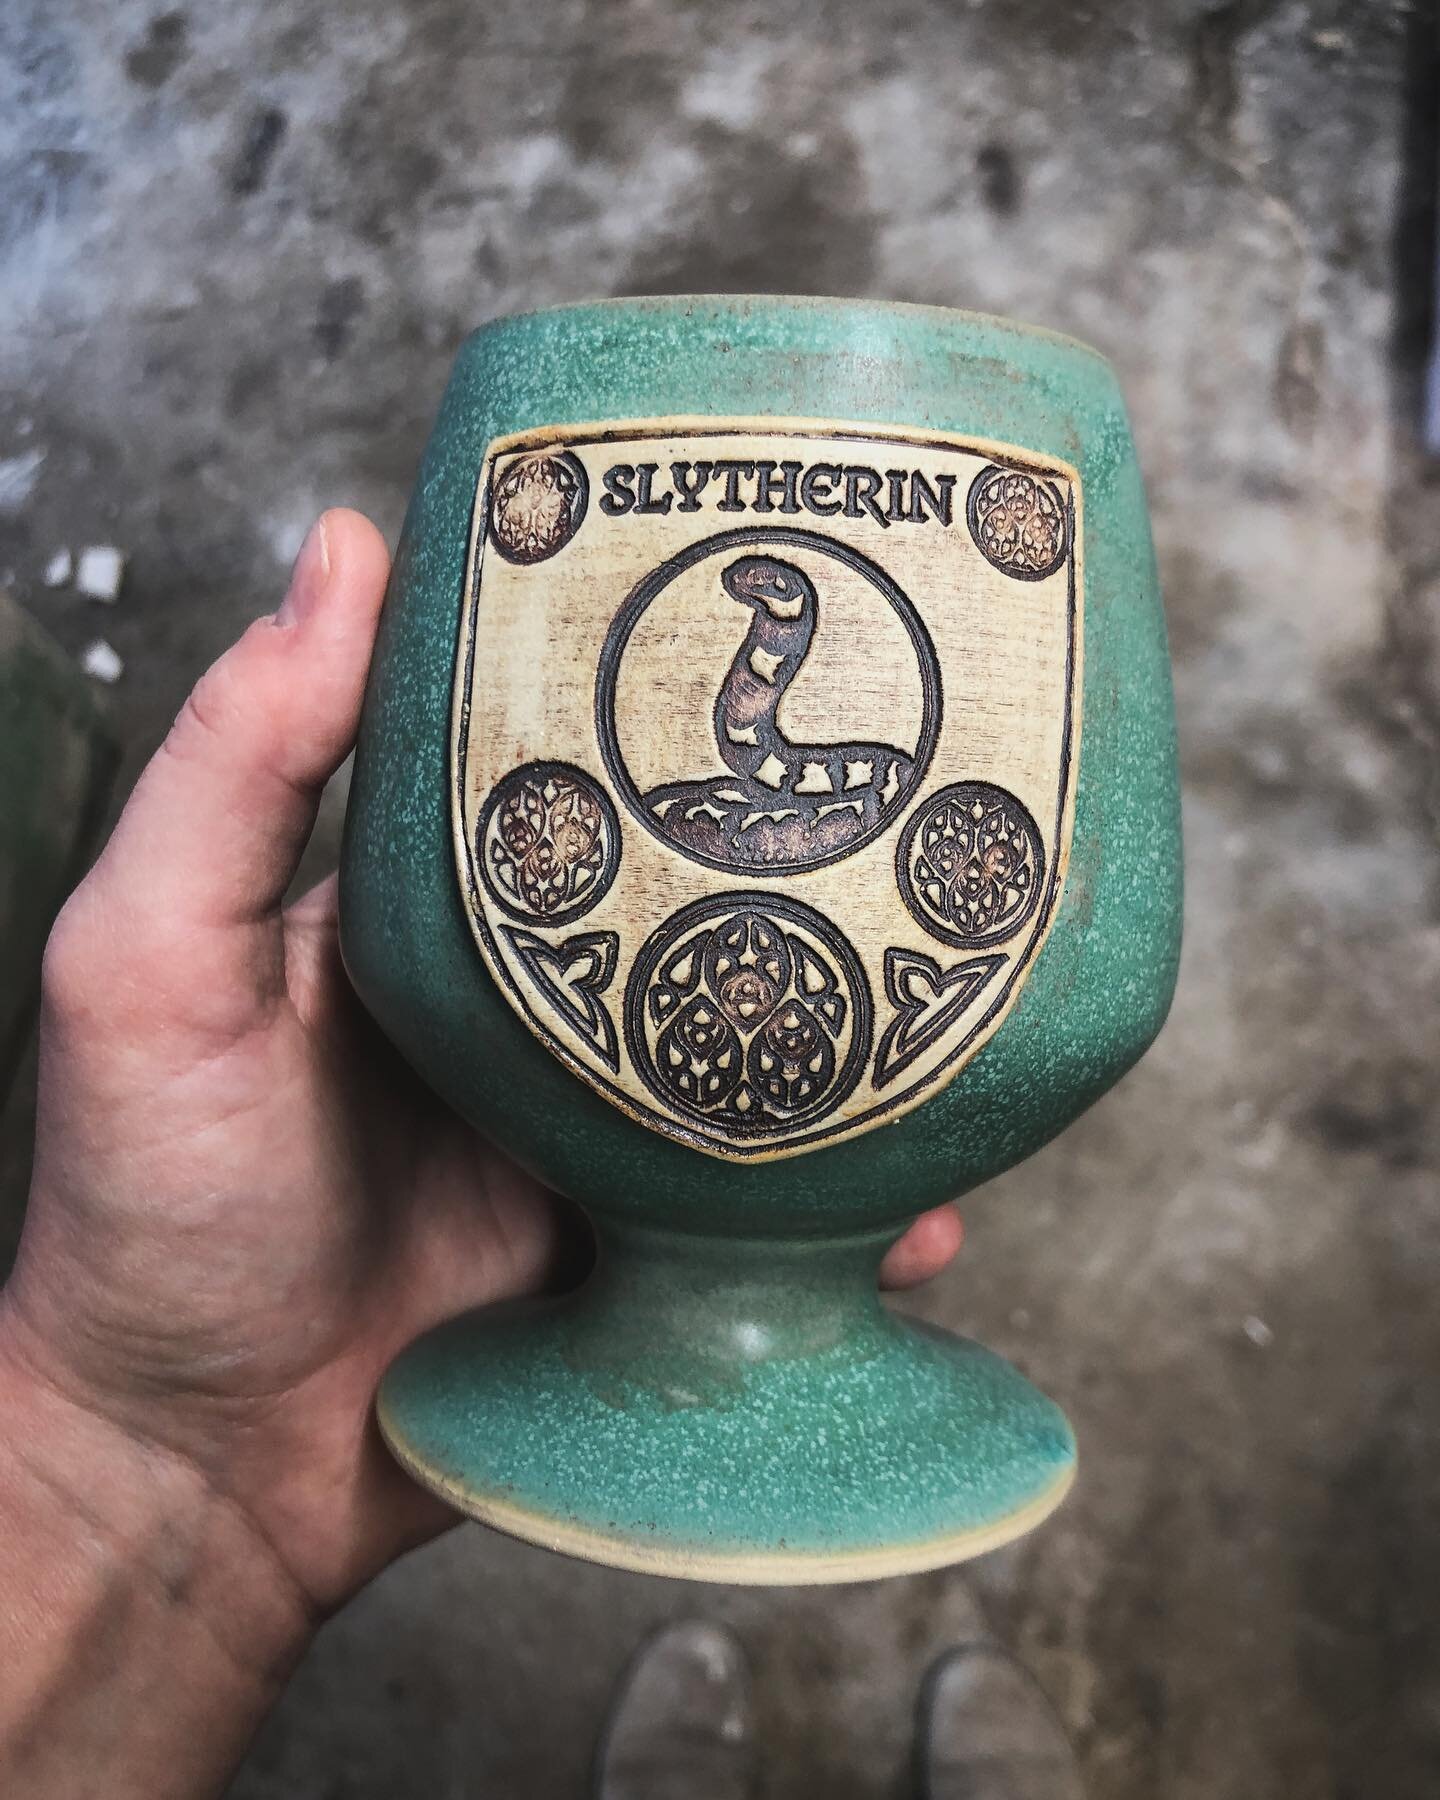 There&rsquo;s a lot of new stuff happenin&rsquo; with this particular piece 😄

🐍 New shape. I&rsquo;ve never made goblets before, but as some of y&rsquo;all know it&rsquo;s been on my to-do list for at least a year.

🐍 New Slytherin design. The de